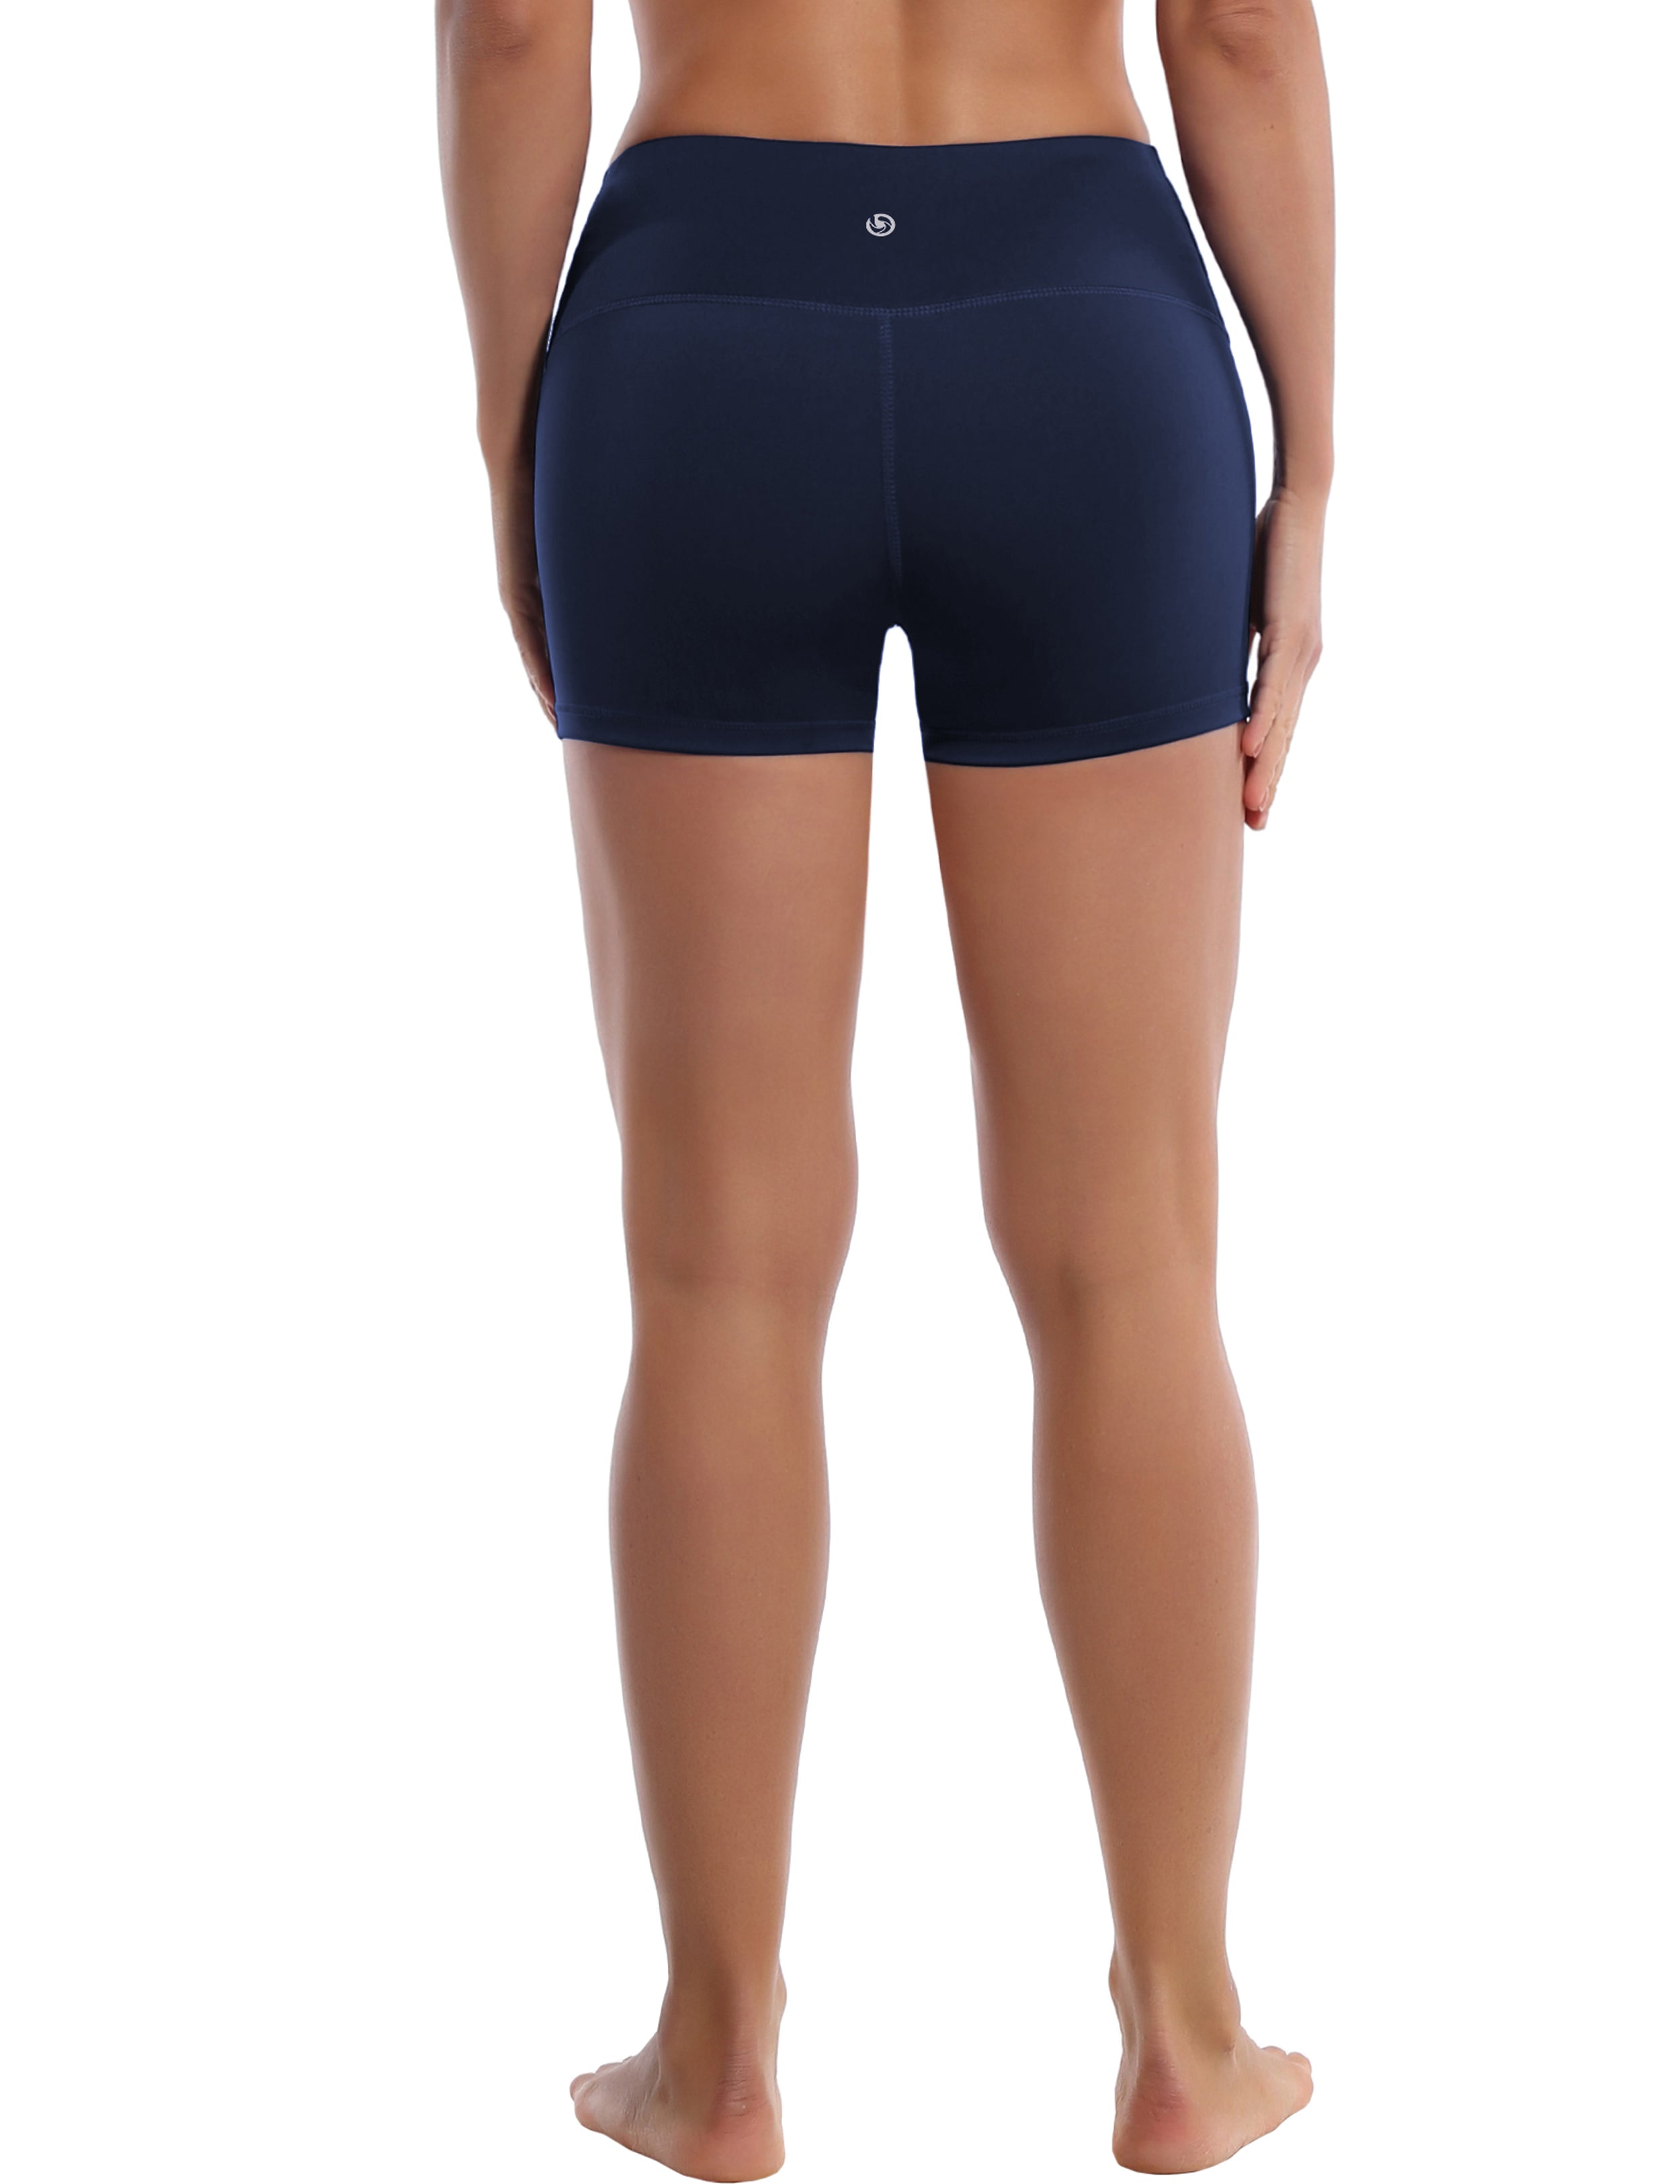 2.5" Jogging Shorts darknavy Softest-ever fabric High elasticity High density 4-way stretch Fabric doesn't attract lint easily No see-through Moisture-wicking Machine wash 75% Nylon, 25% Spandex